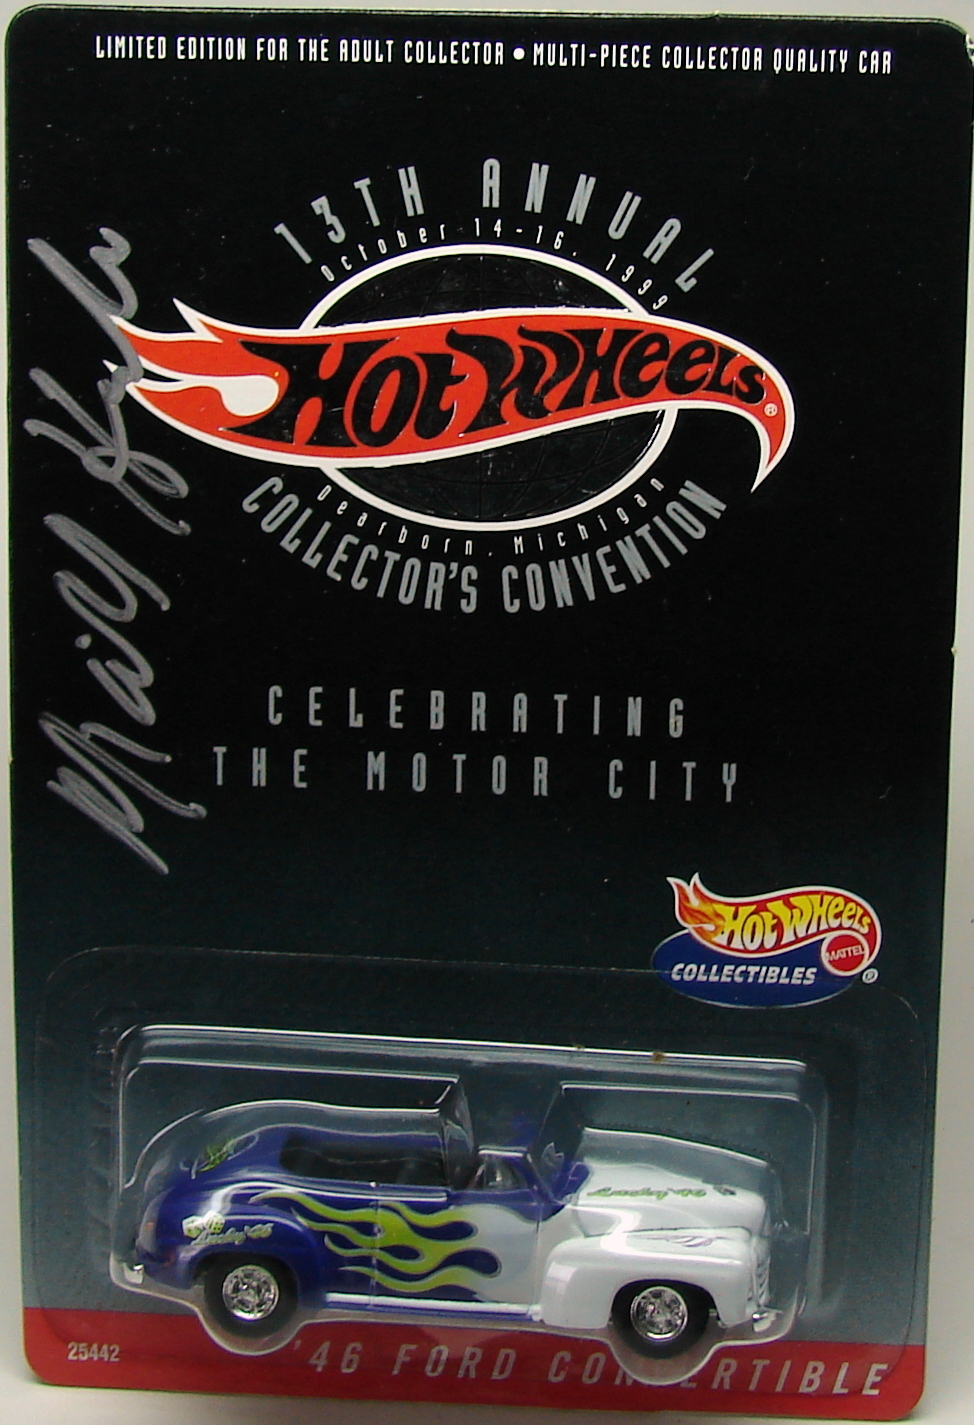 13th Annual Hot Wheels Collectors Convention | Hot Wheels Wiki 